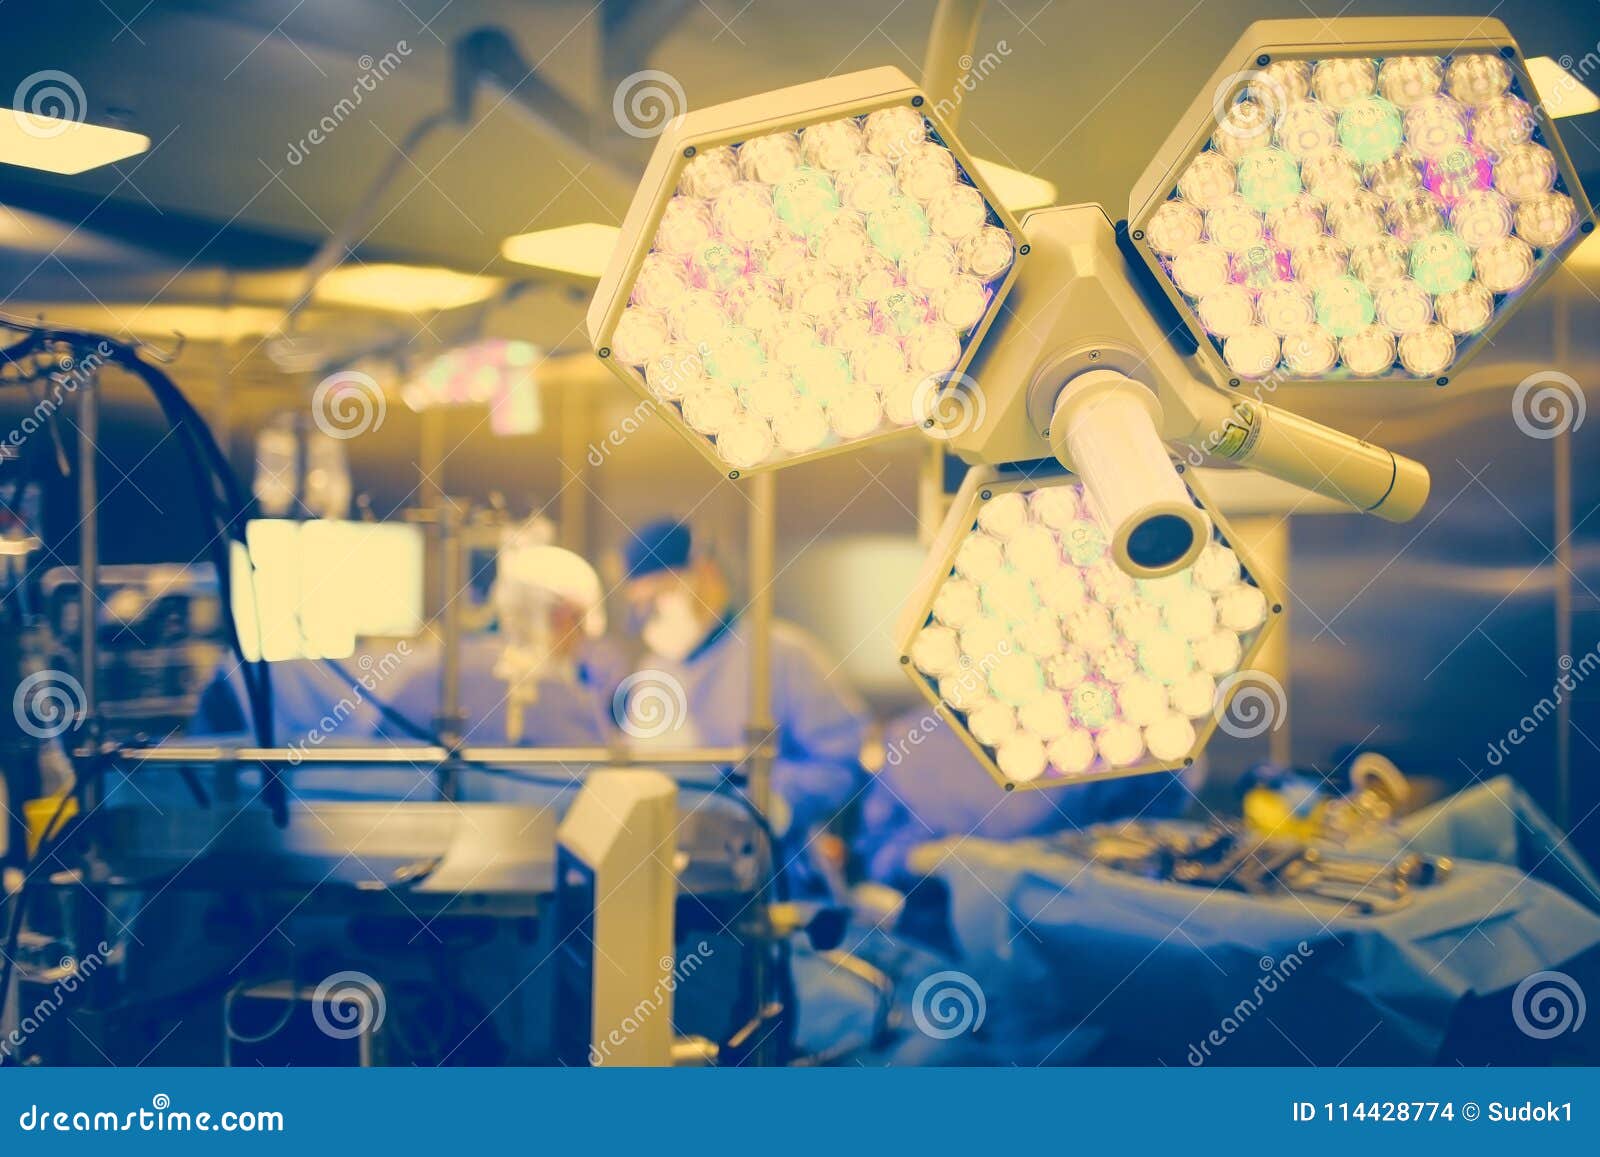 surgical shadowless lamp in the equipped room on the background